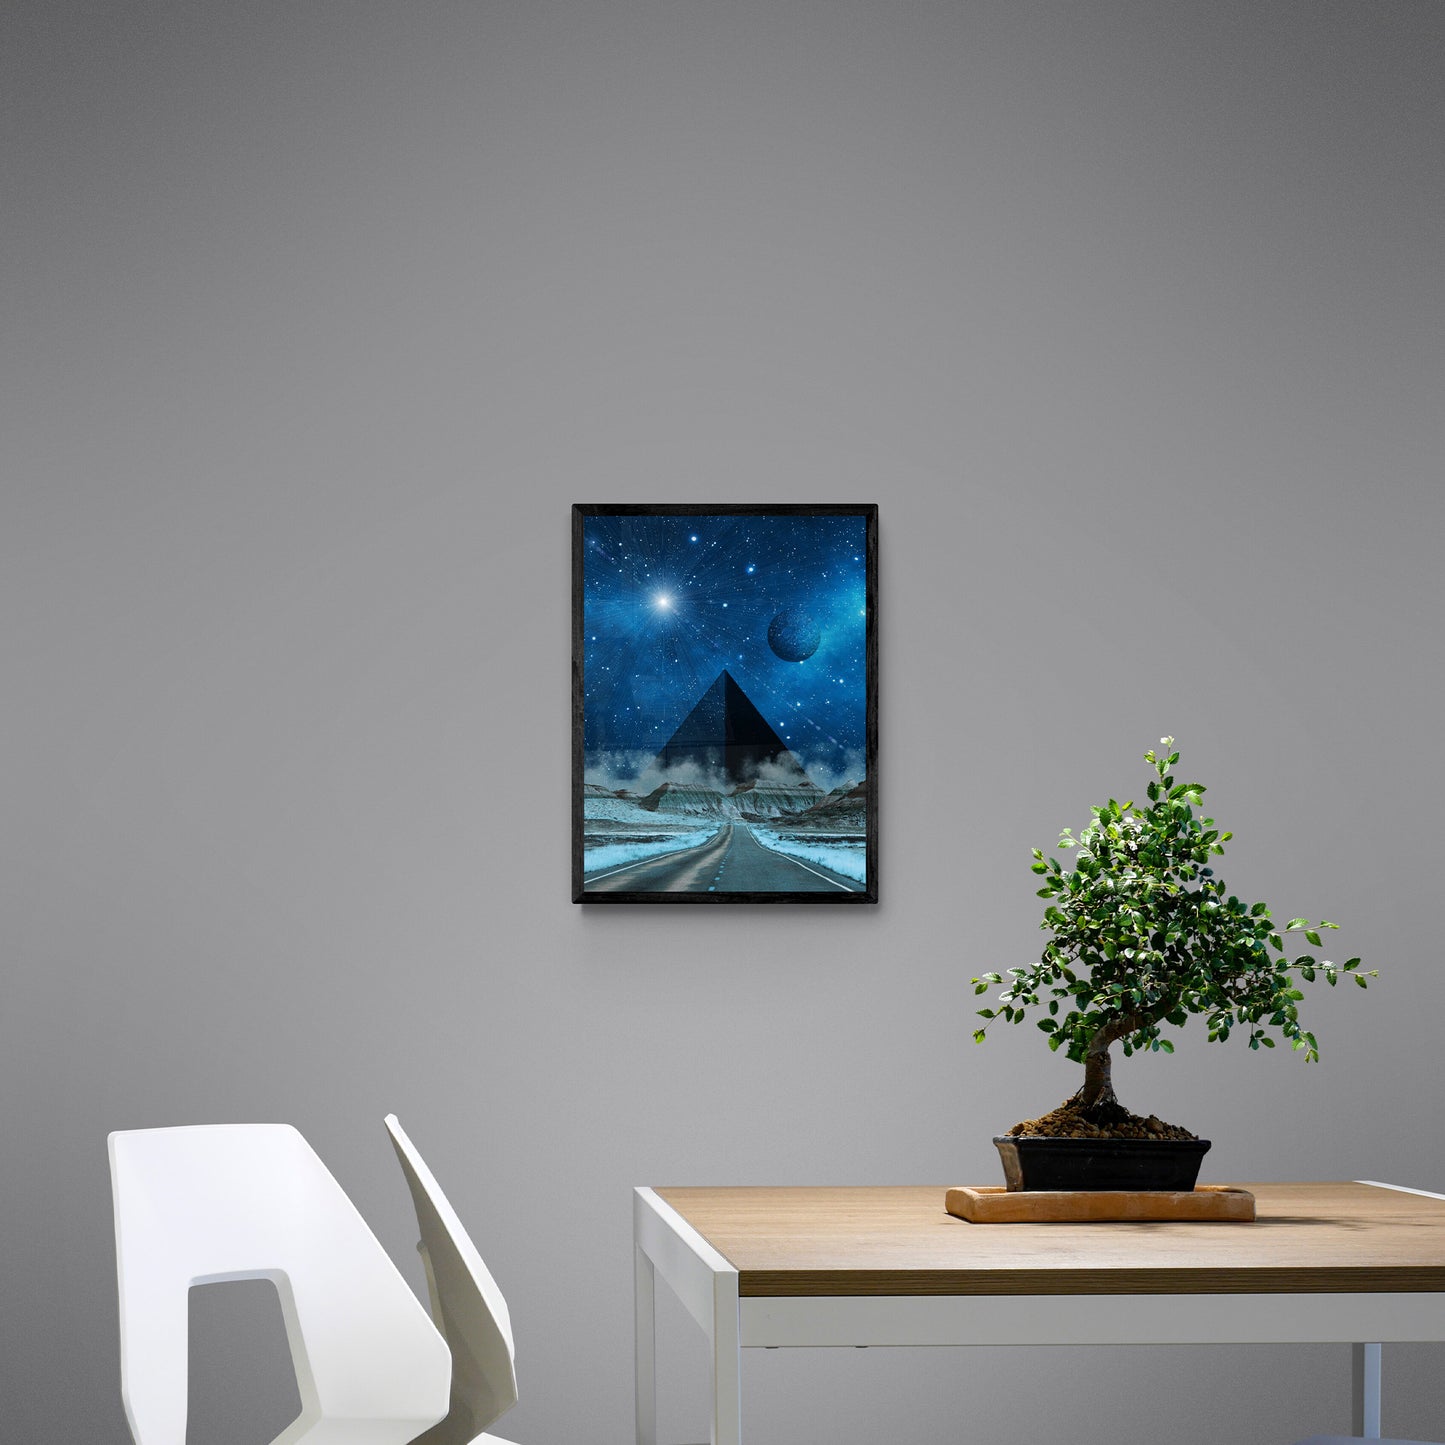 Black Pyramid Road 18X24 Inch Poster Print for Sci-Fi & Pyramid Art Fans, great gift for home decor and room design